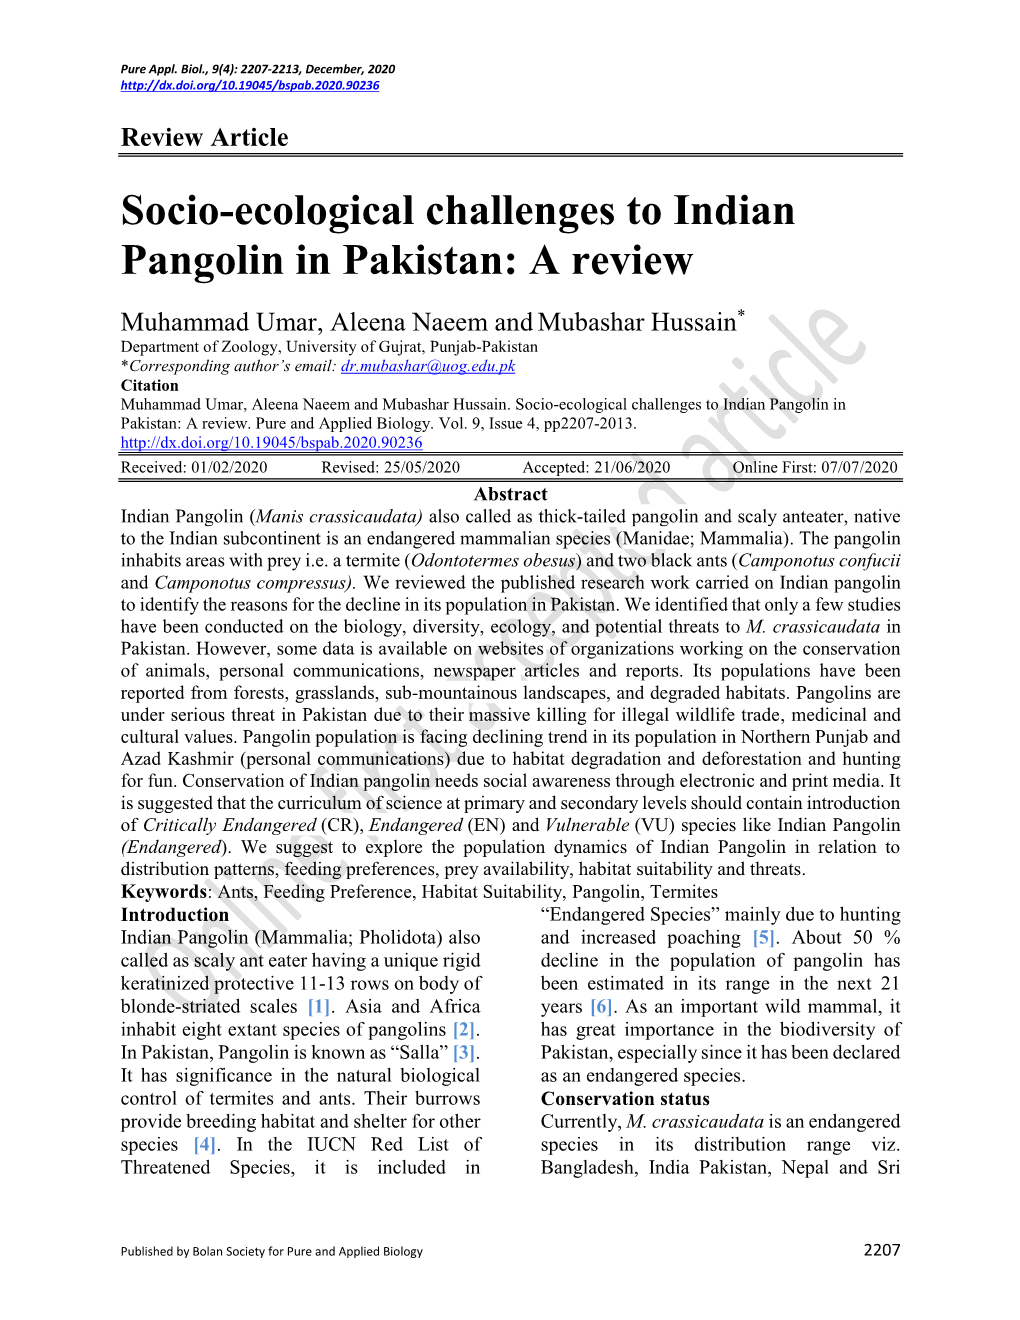 Socio-Ecological Challenges to Indian Pangolin in Pakistan: a Review